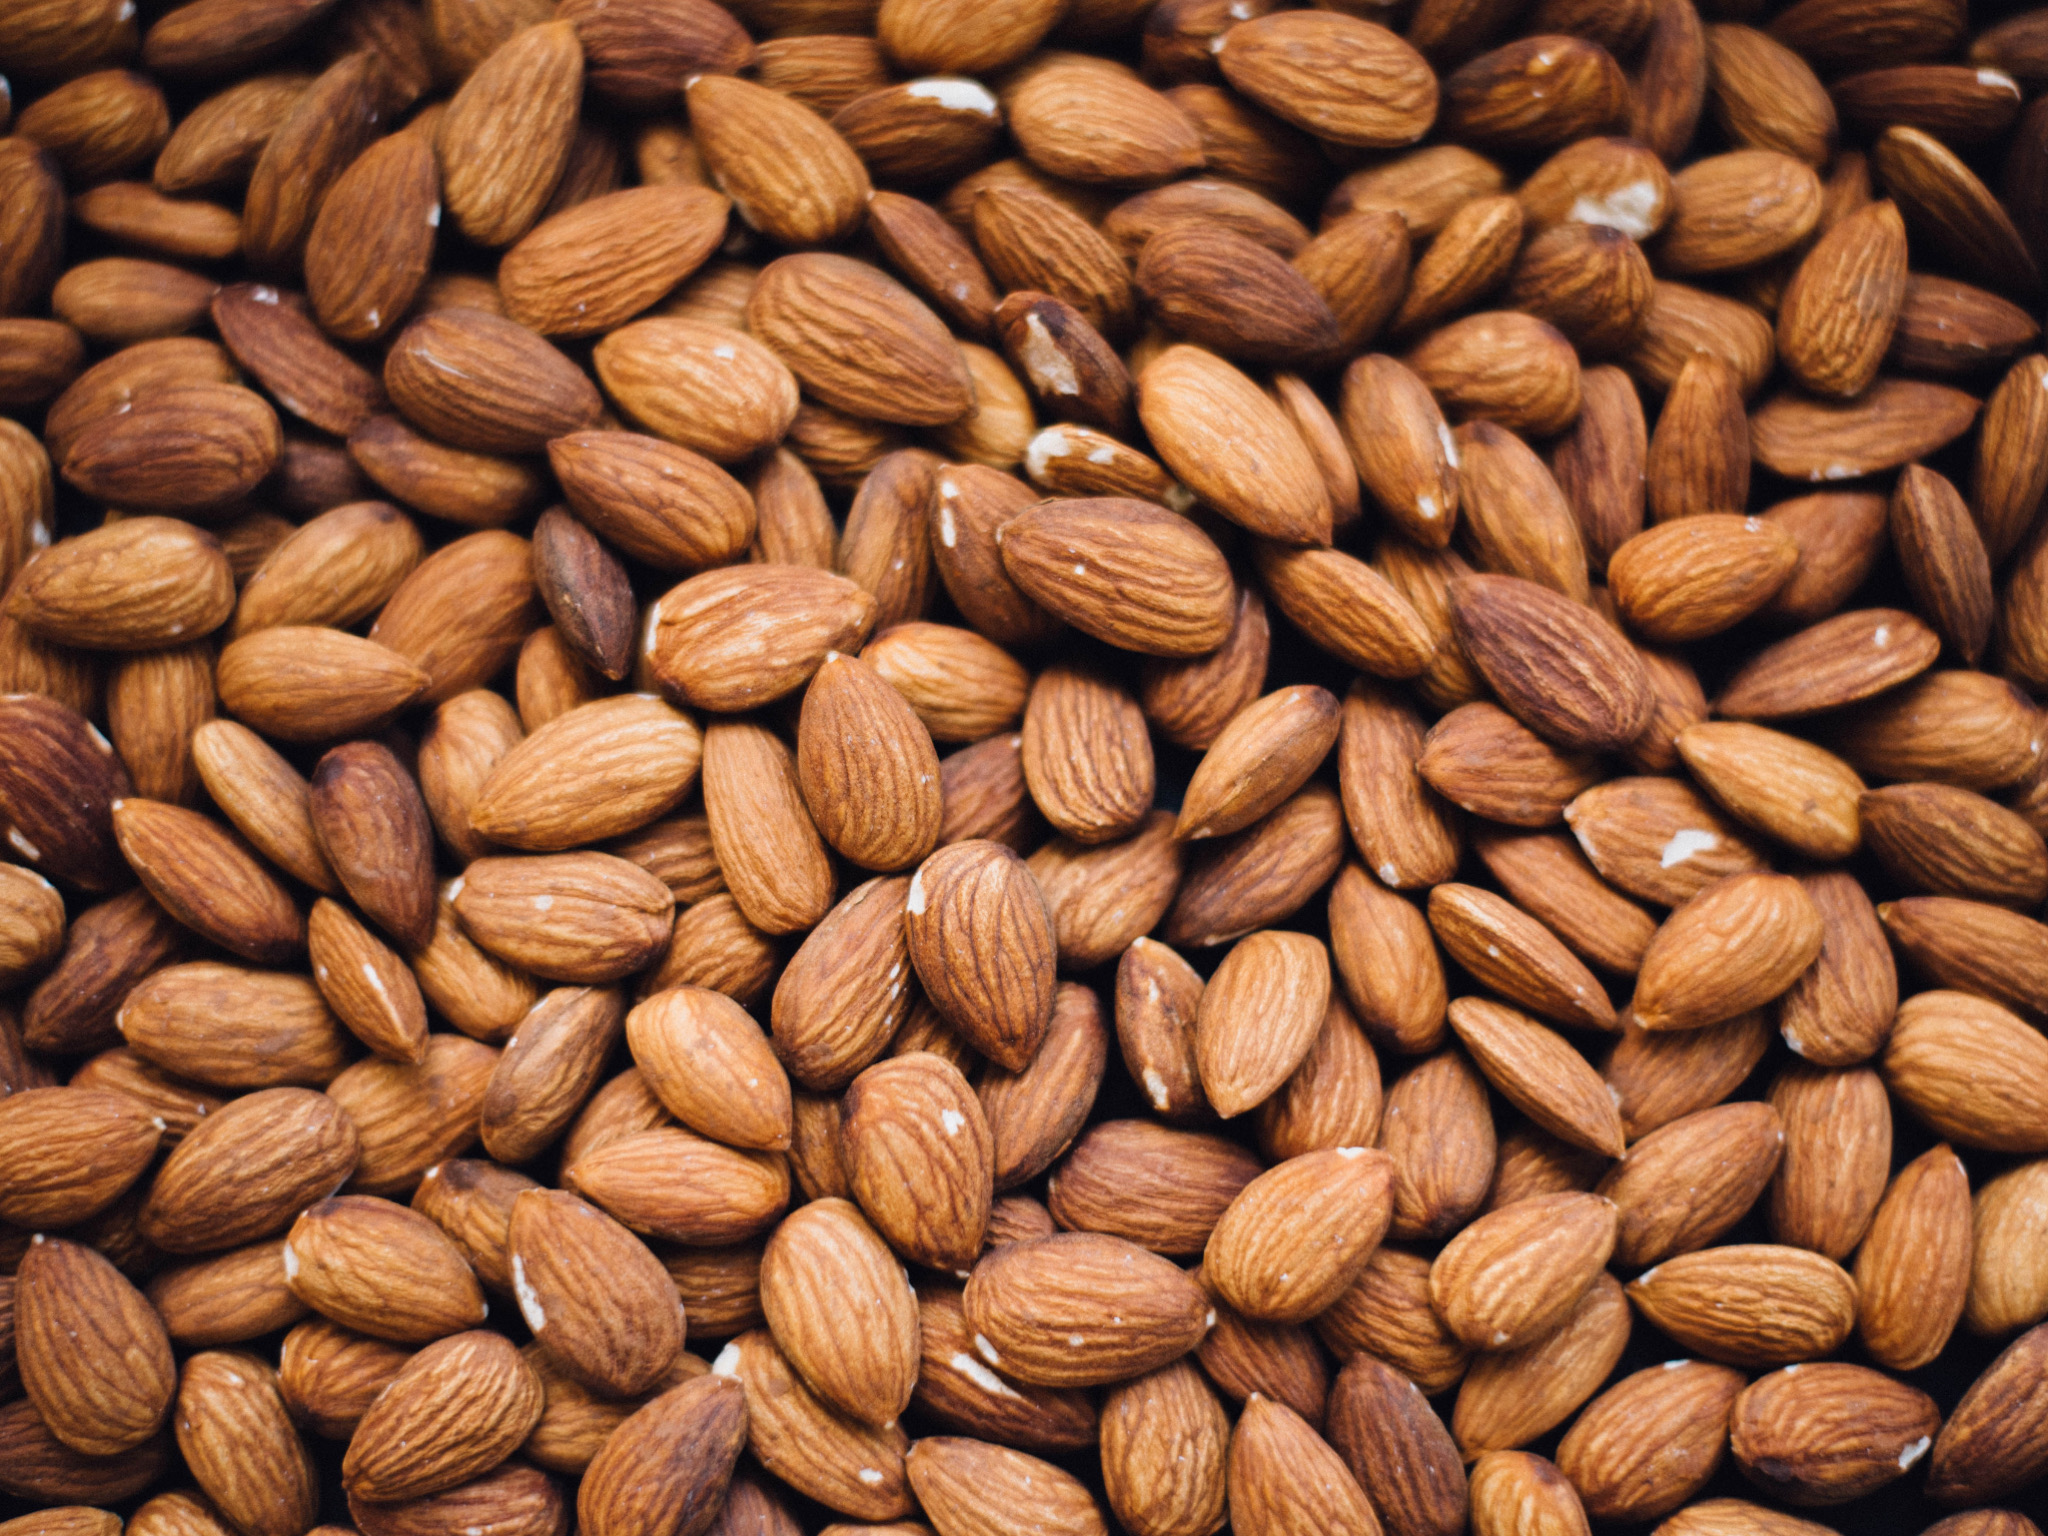 Americans consume a lot of almonds! Consider some eco friendly alternatives.